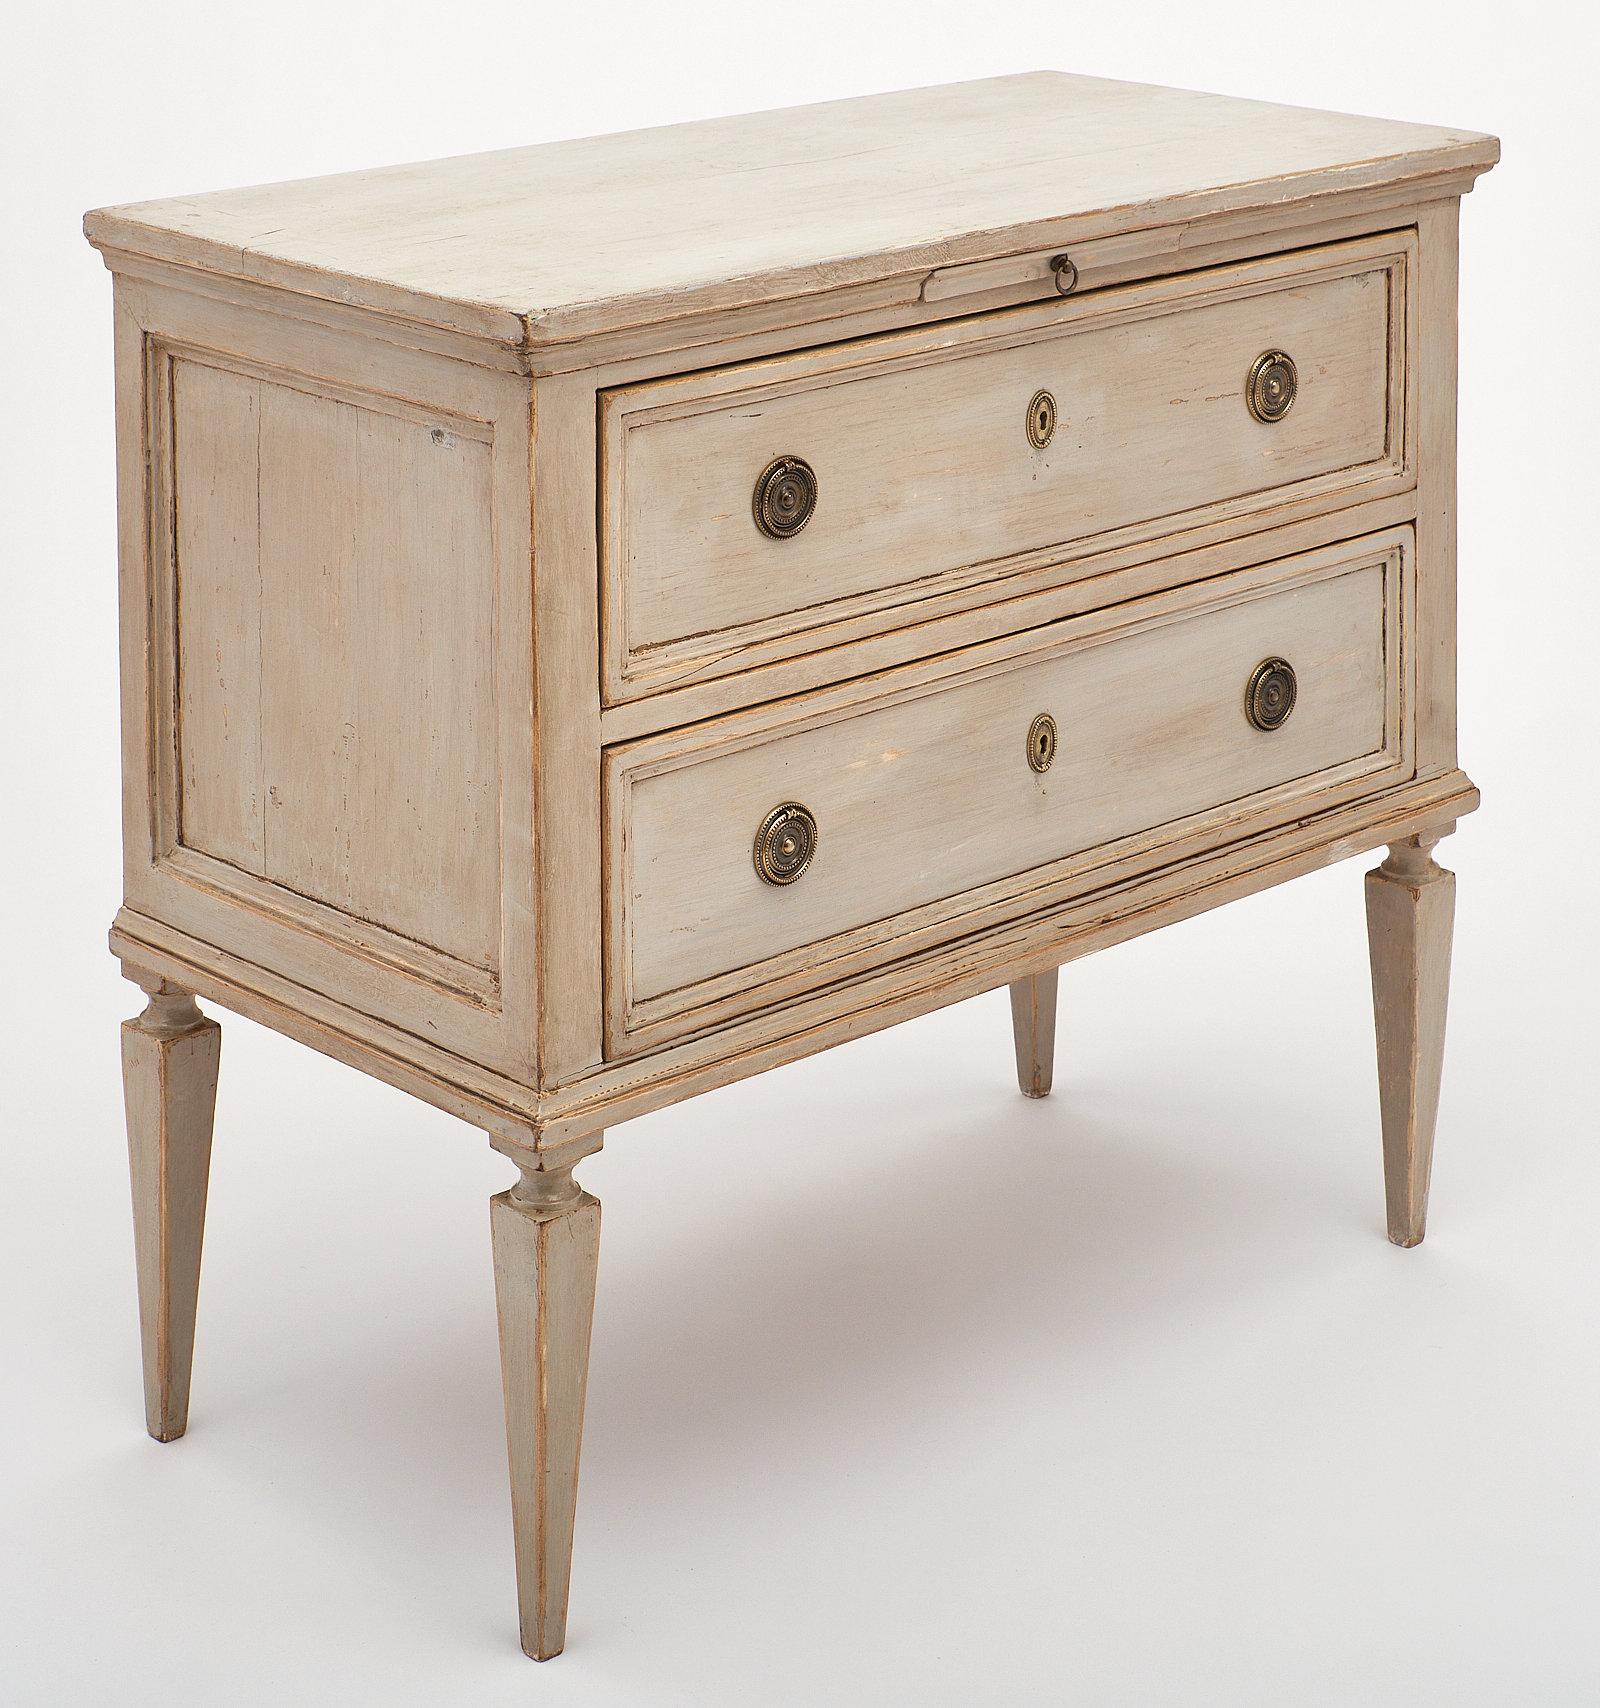 A pair of elegant Tuscan Louis XVI antique chests. Each “commode” features two large dovetailed drawers and a pull-out tablet. We love the very clean and smooth shape of this pair with finely cast patinated bronze hardware. The lines exude classical